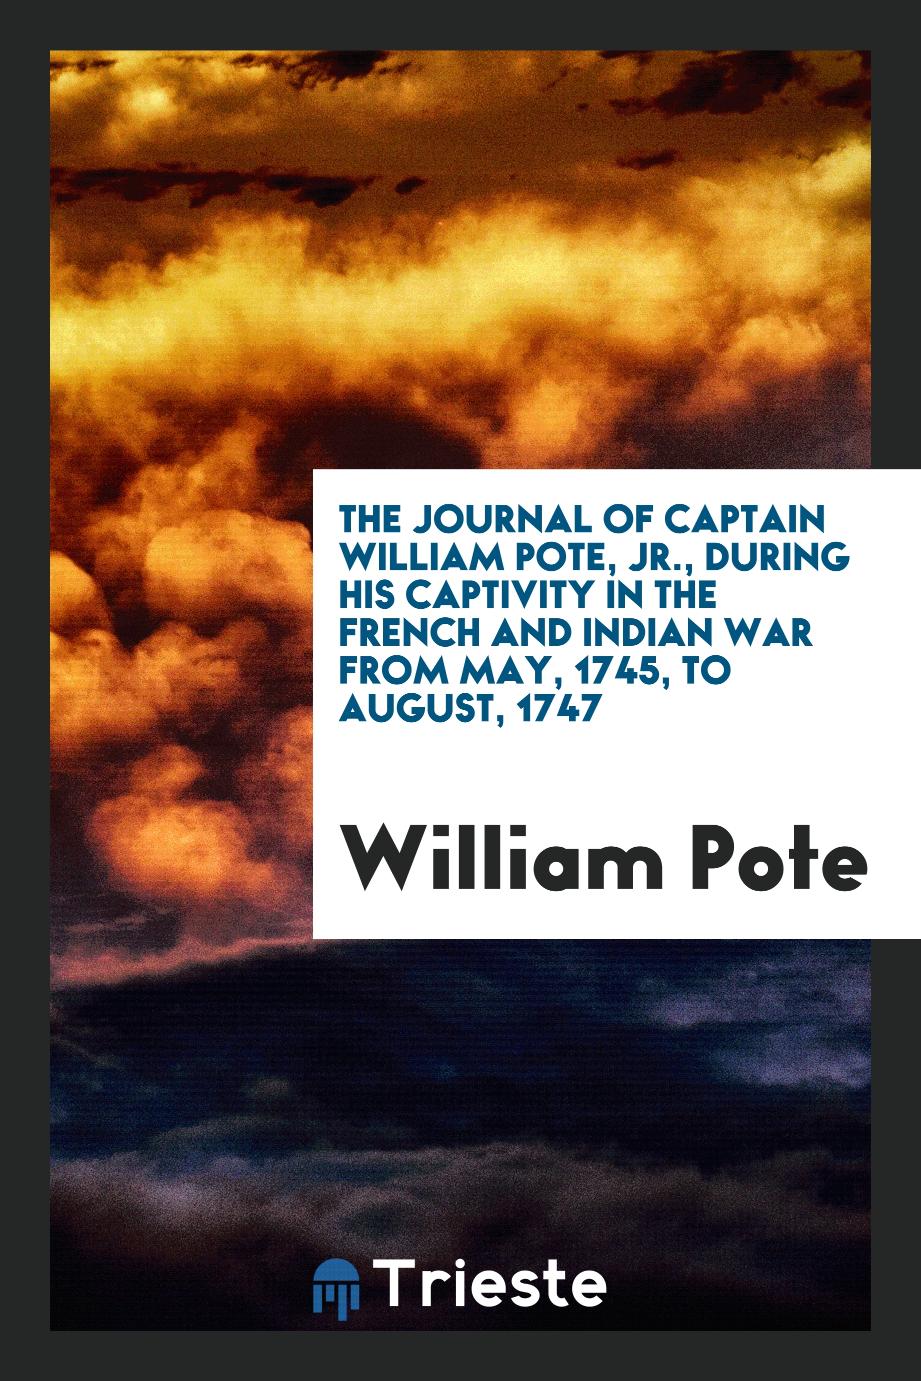 The Journal of Captain William Pote, Jr., During His Captivity in the French and Indian War from May, 1745, to August, 1747